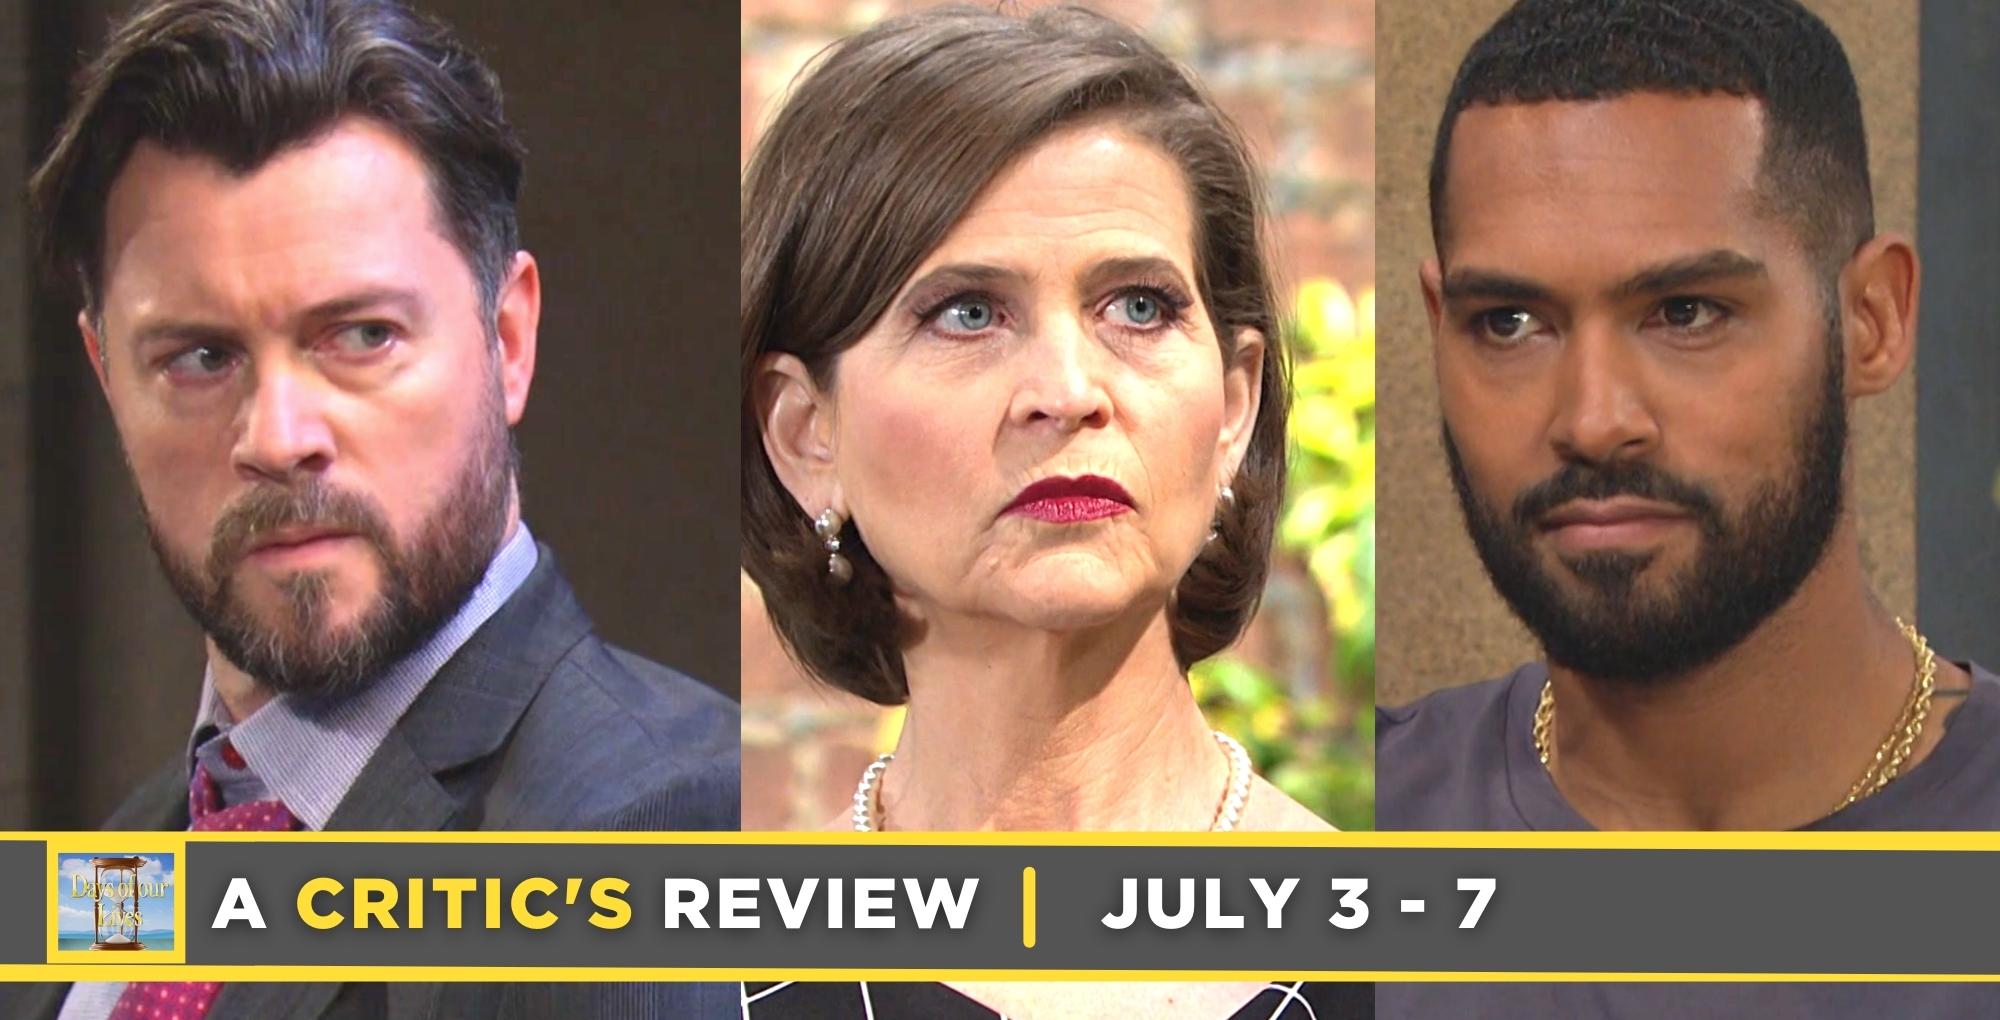 days of our lives critic's review for july 3 – june 7, 2023, three images ej, megan, and eli.